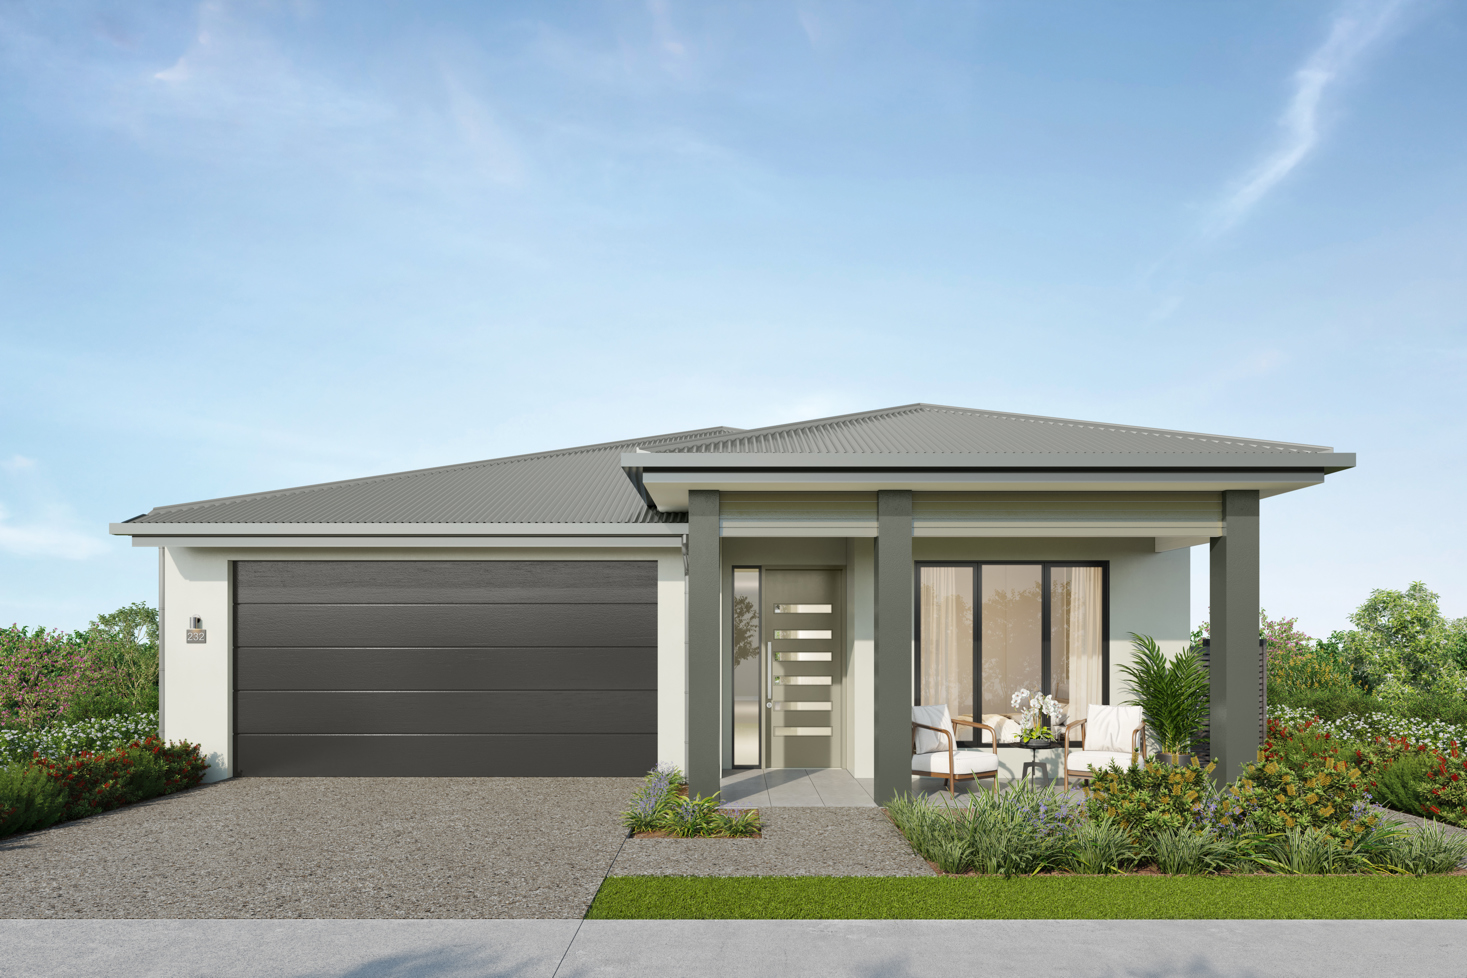 Facade render of the Yarra H3 house design with a hip roofline in rainforest colour scheme, located at Stockland Halcyon Gables in The Hills district.